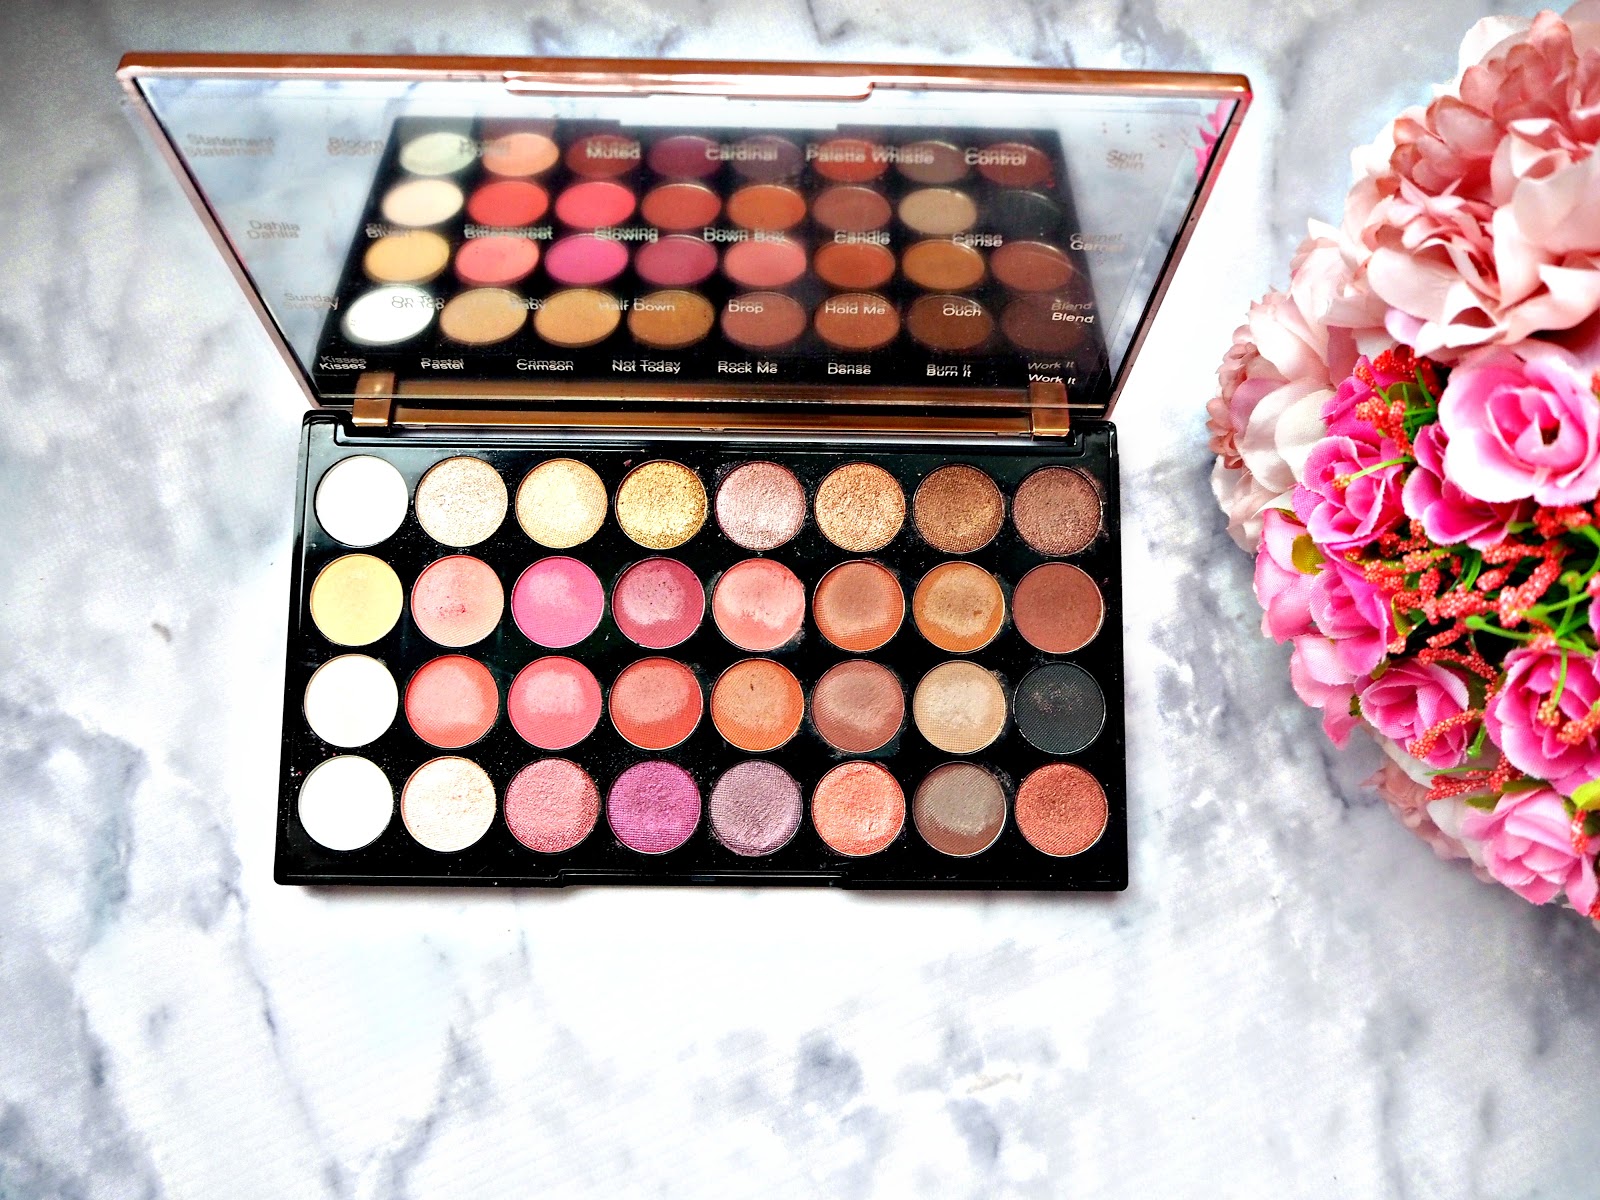 REVIEW MAKEUP REVOLUTION FLAWLESS 4 EYESHADOW PALETTE